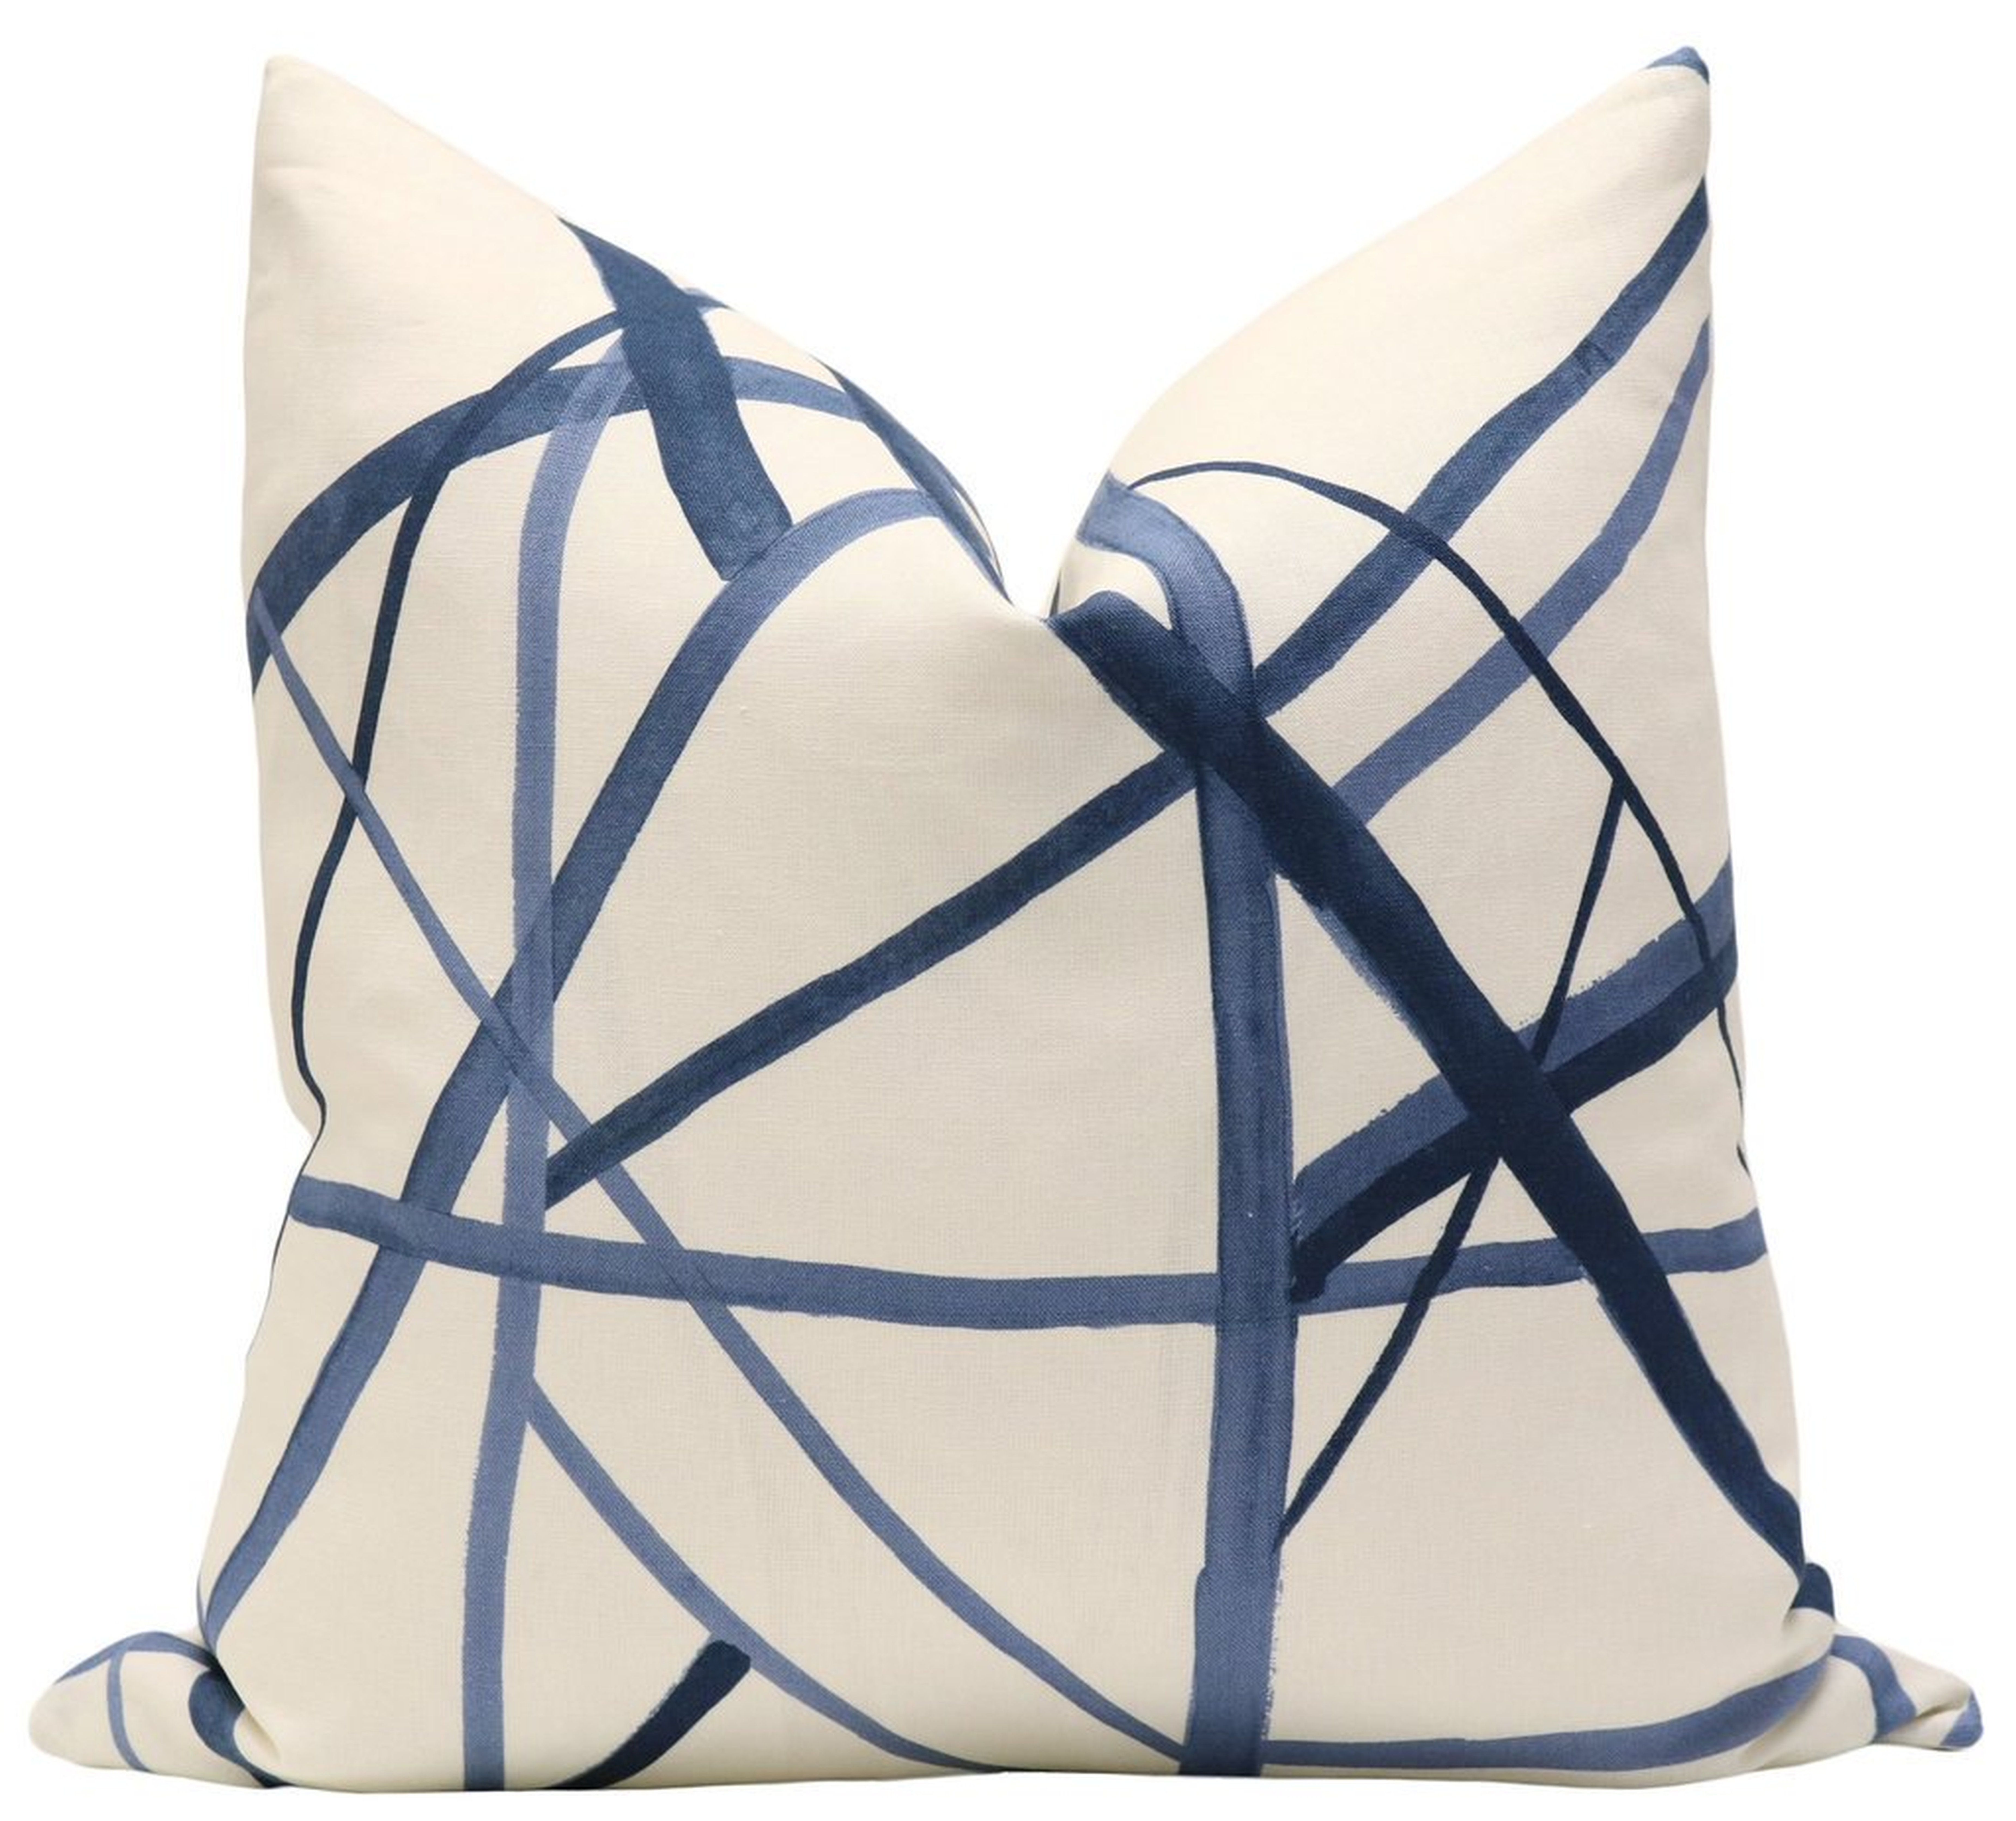 Channels // Periwinkle, pillow cover 20" x 20" - Little Design Company